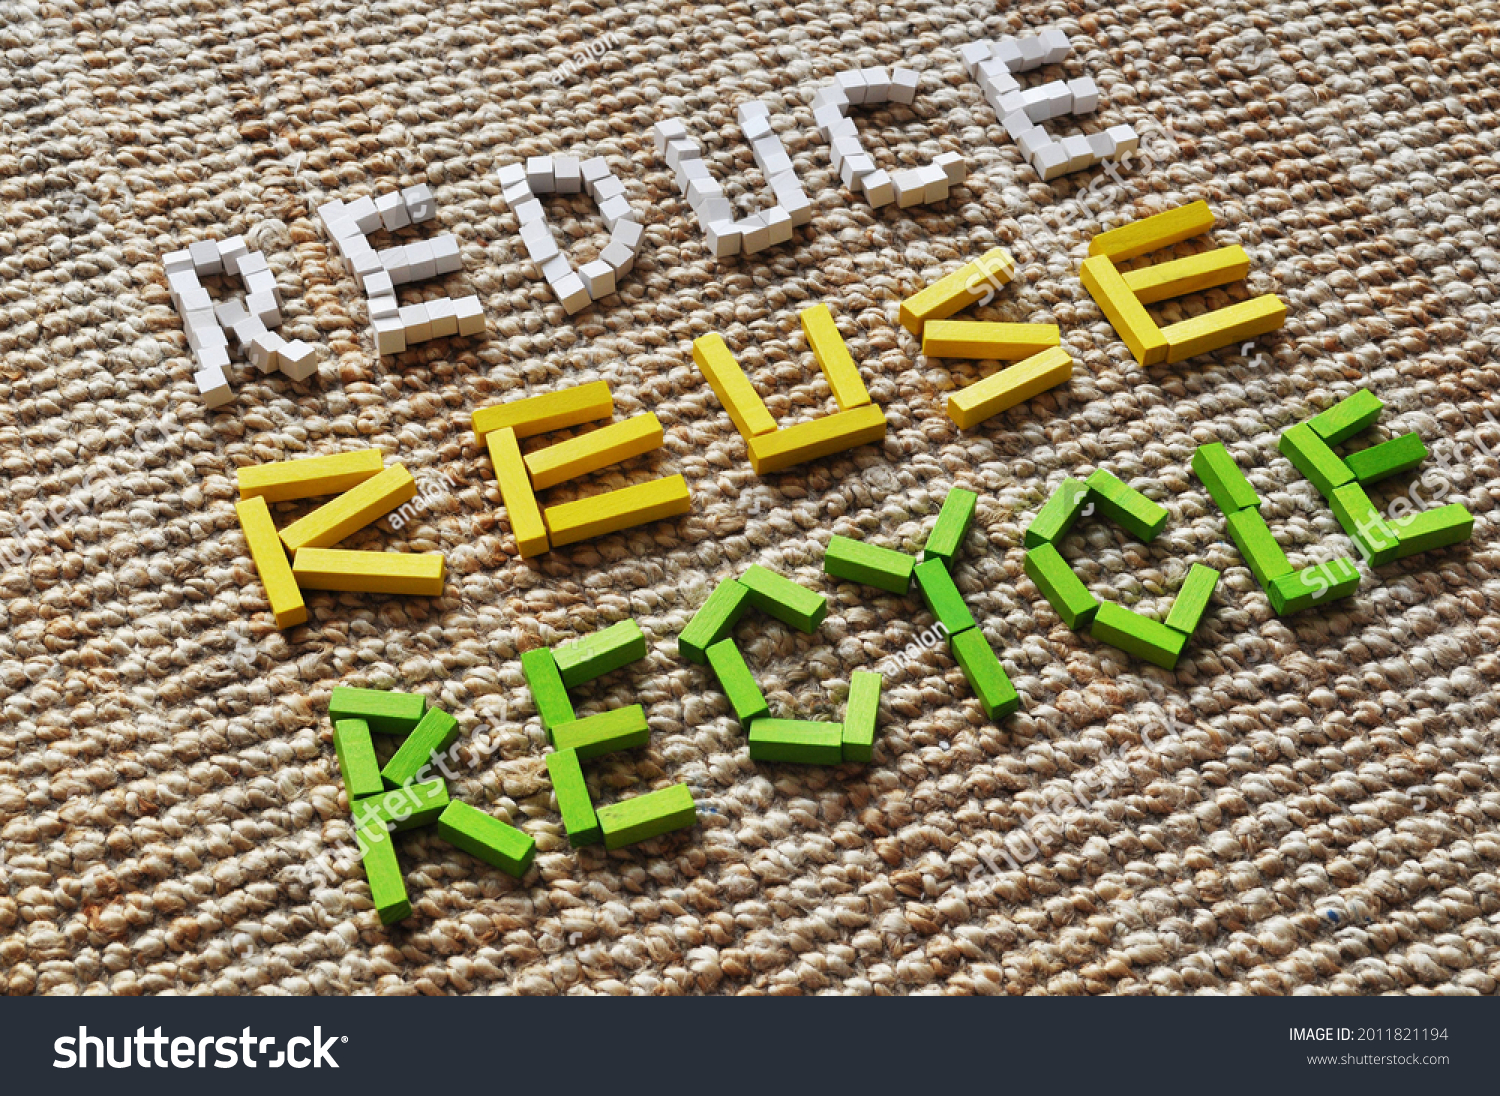 3D diagonal text in colored wooden blocks in white, yellow and green, on a jute carpet. It reads Reduce, Reuse, Recycle. Message for circular economy, sustainability, climate action, climate change. #2011821194